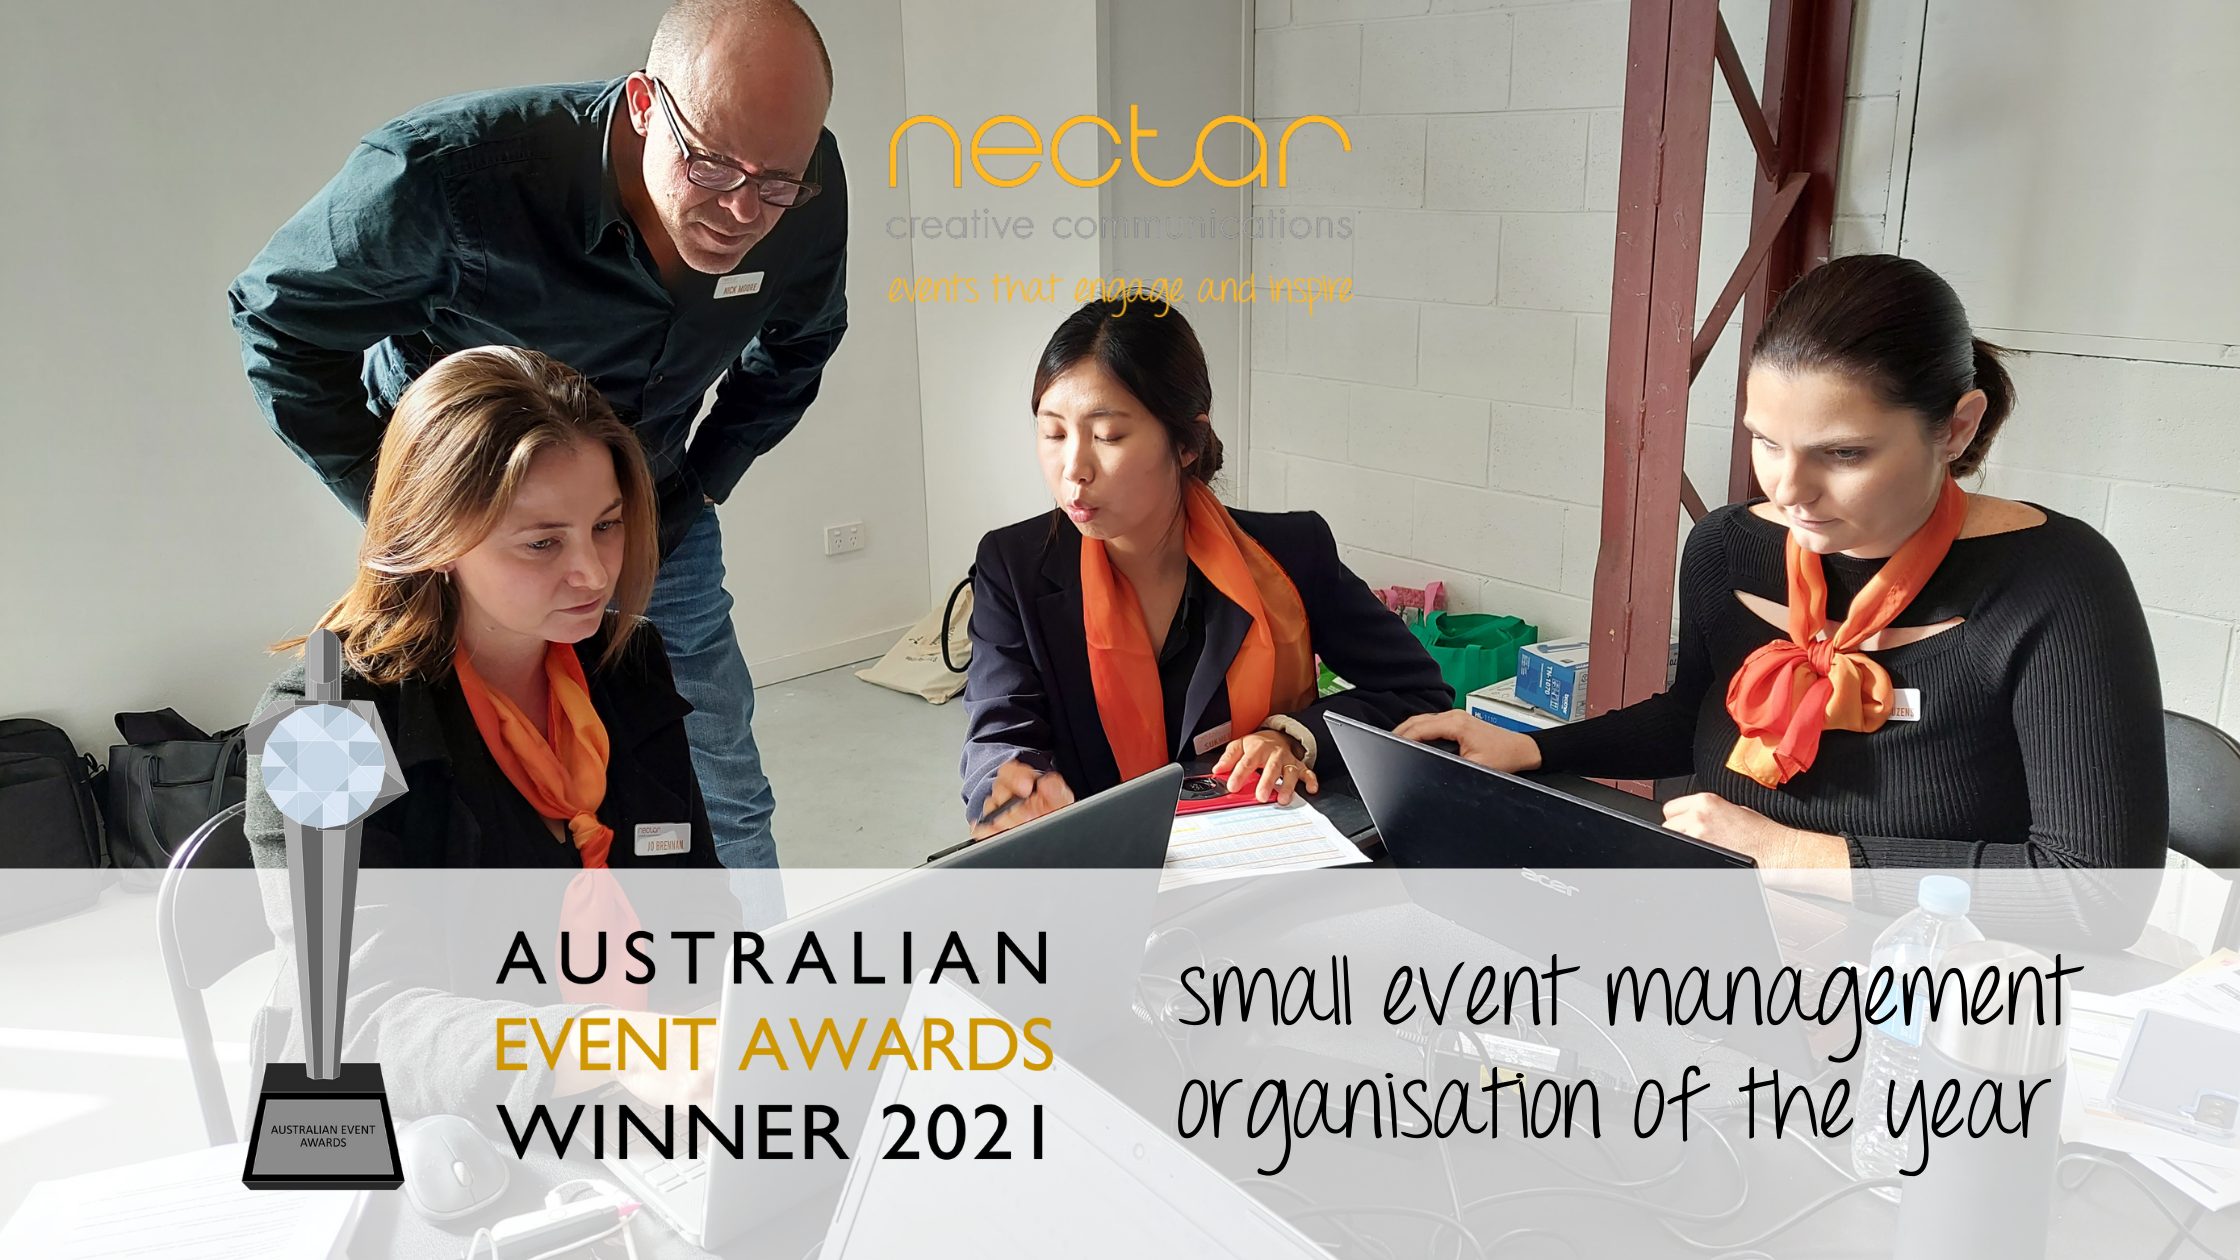 Nectar Creative Communications wins Small Event Management Organisation of the Year 2021 - Nectar Creative Communications